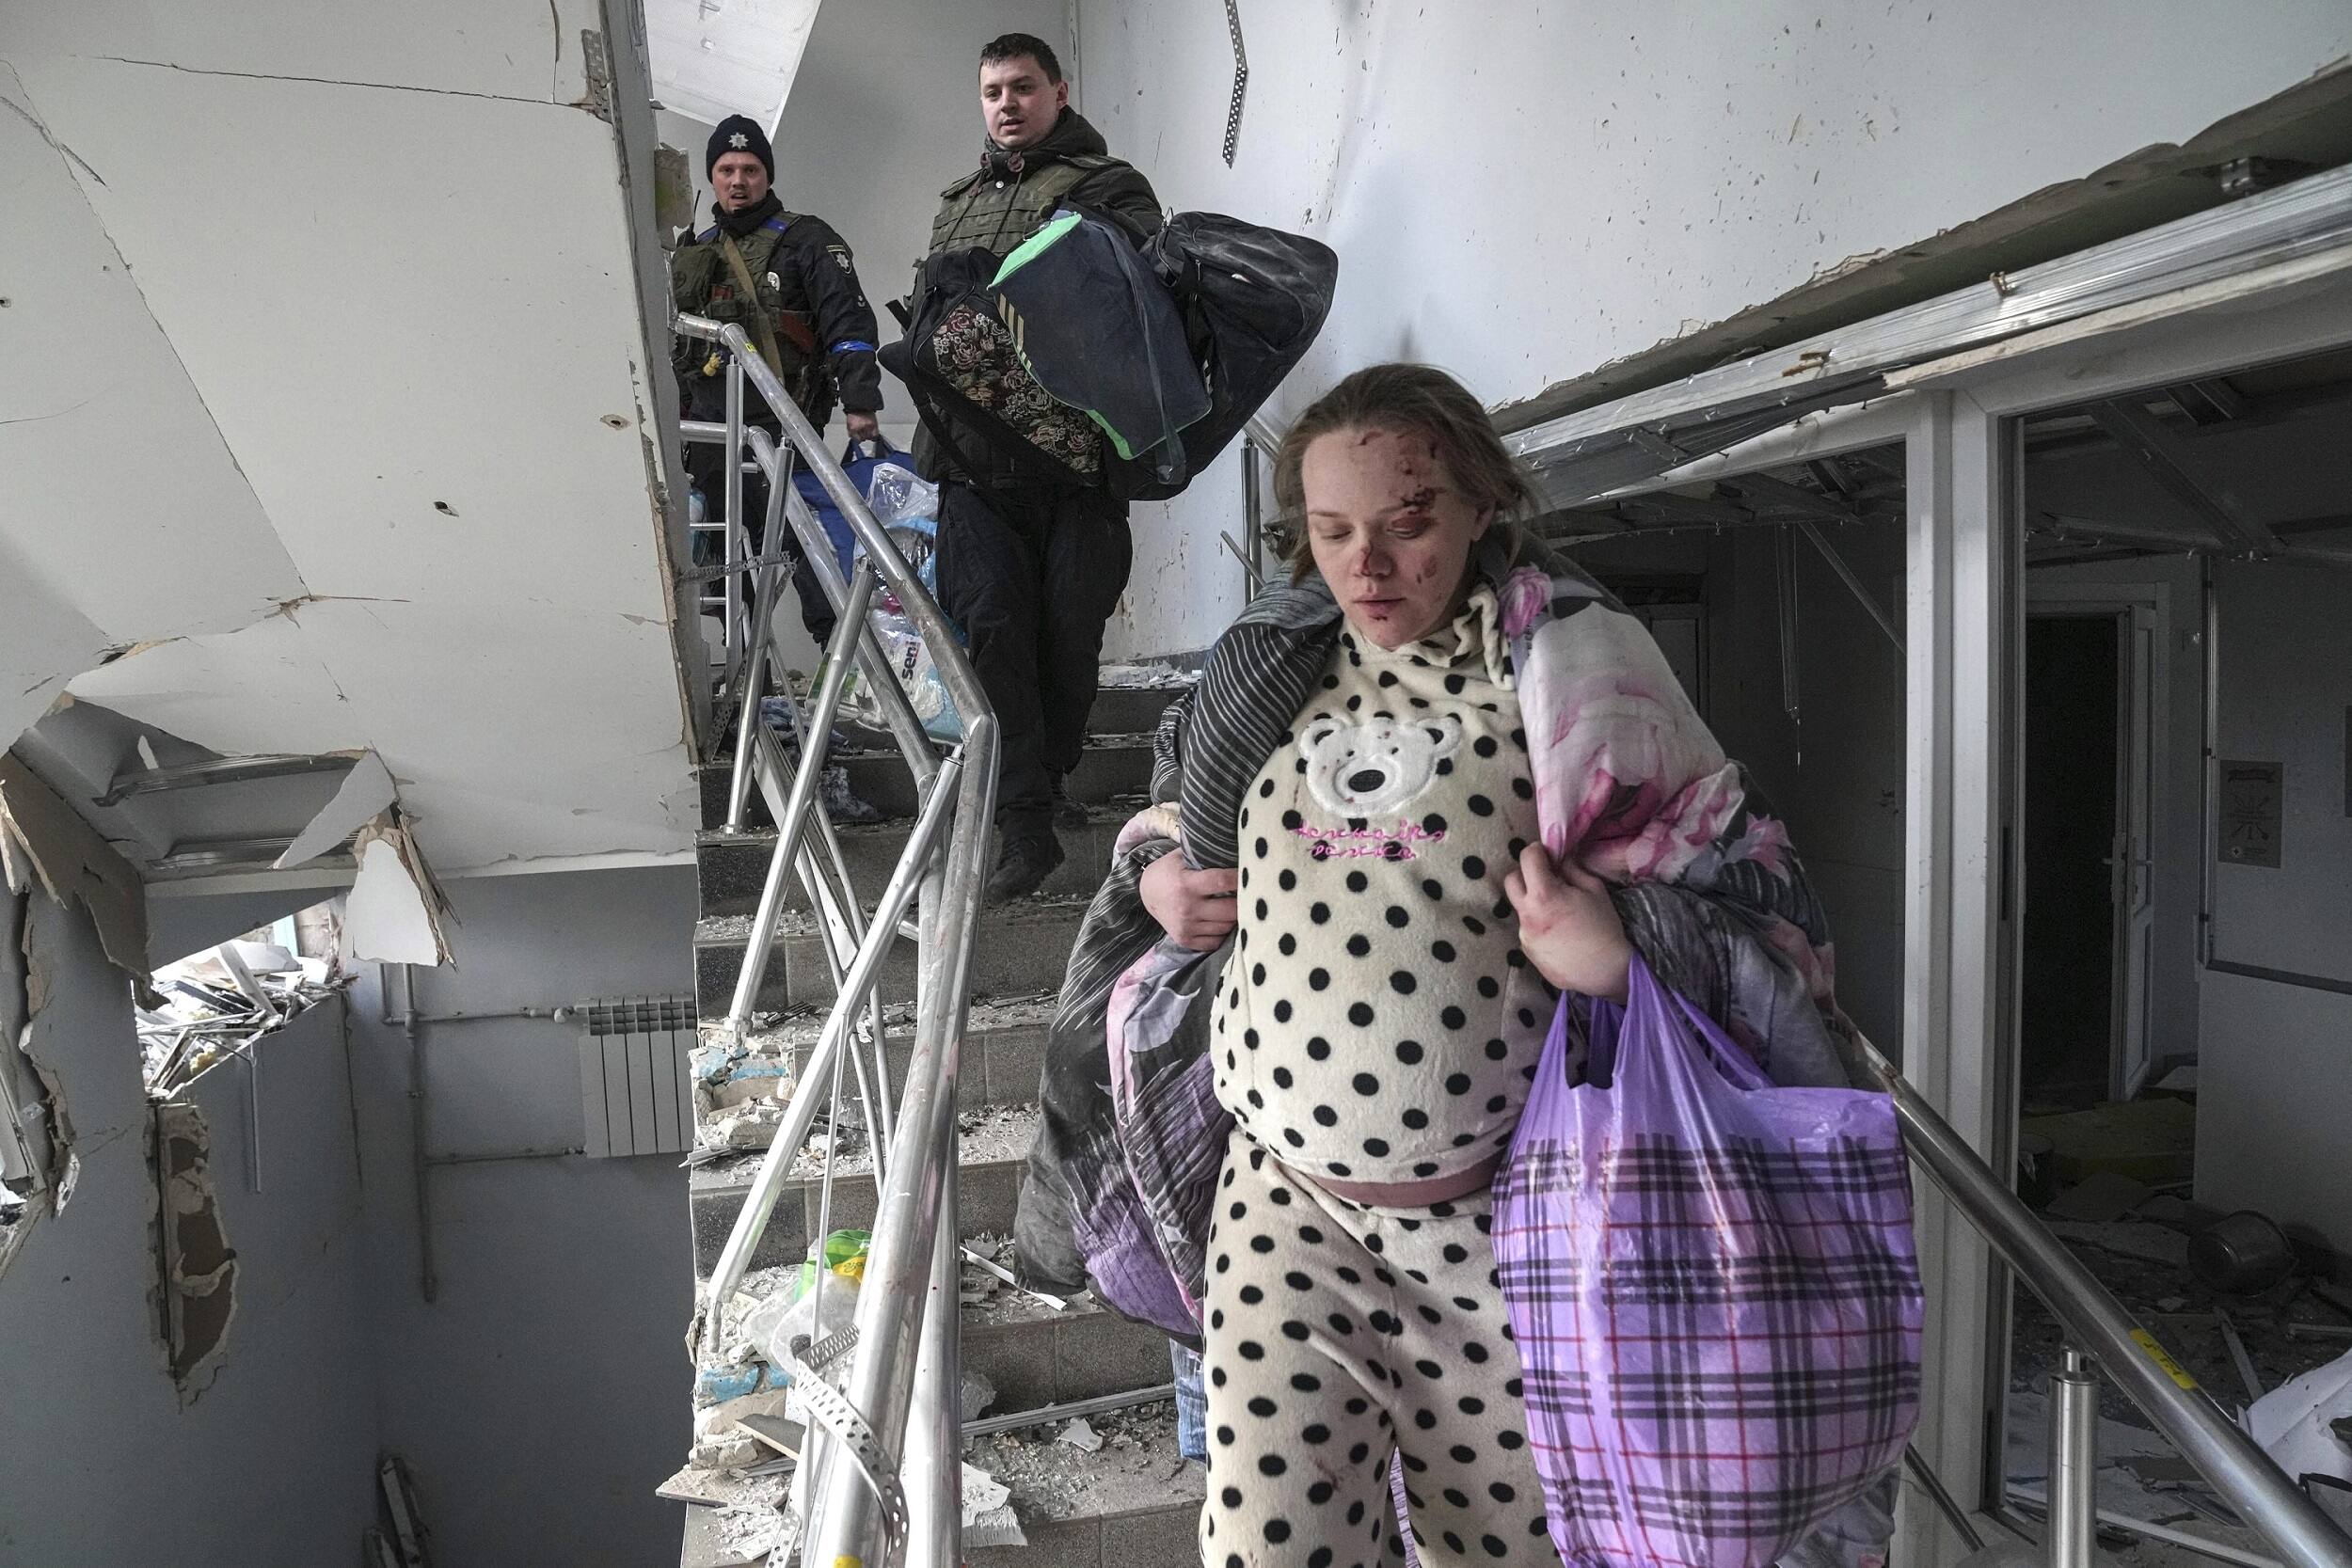 Pregnant woman runs for life after shelling attack in Mariupol